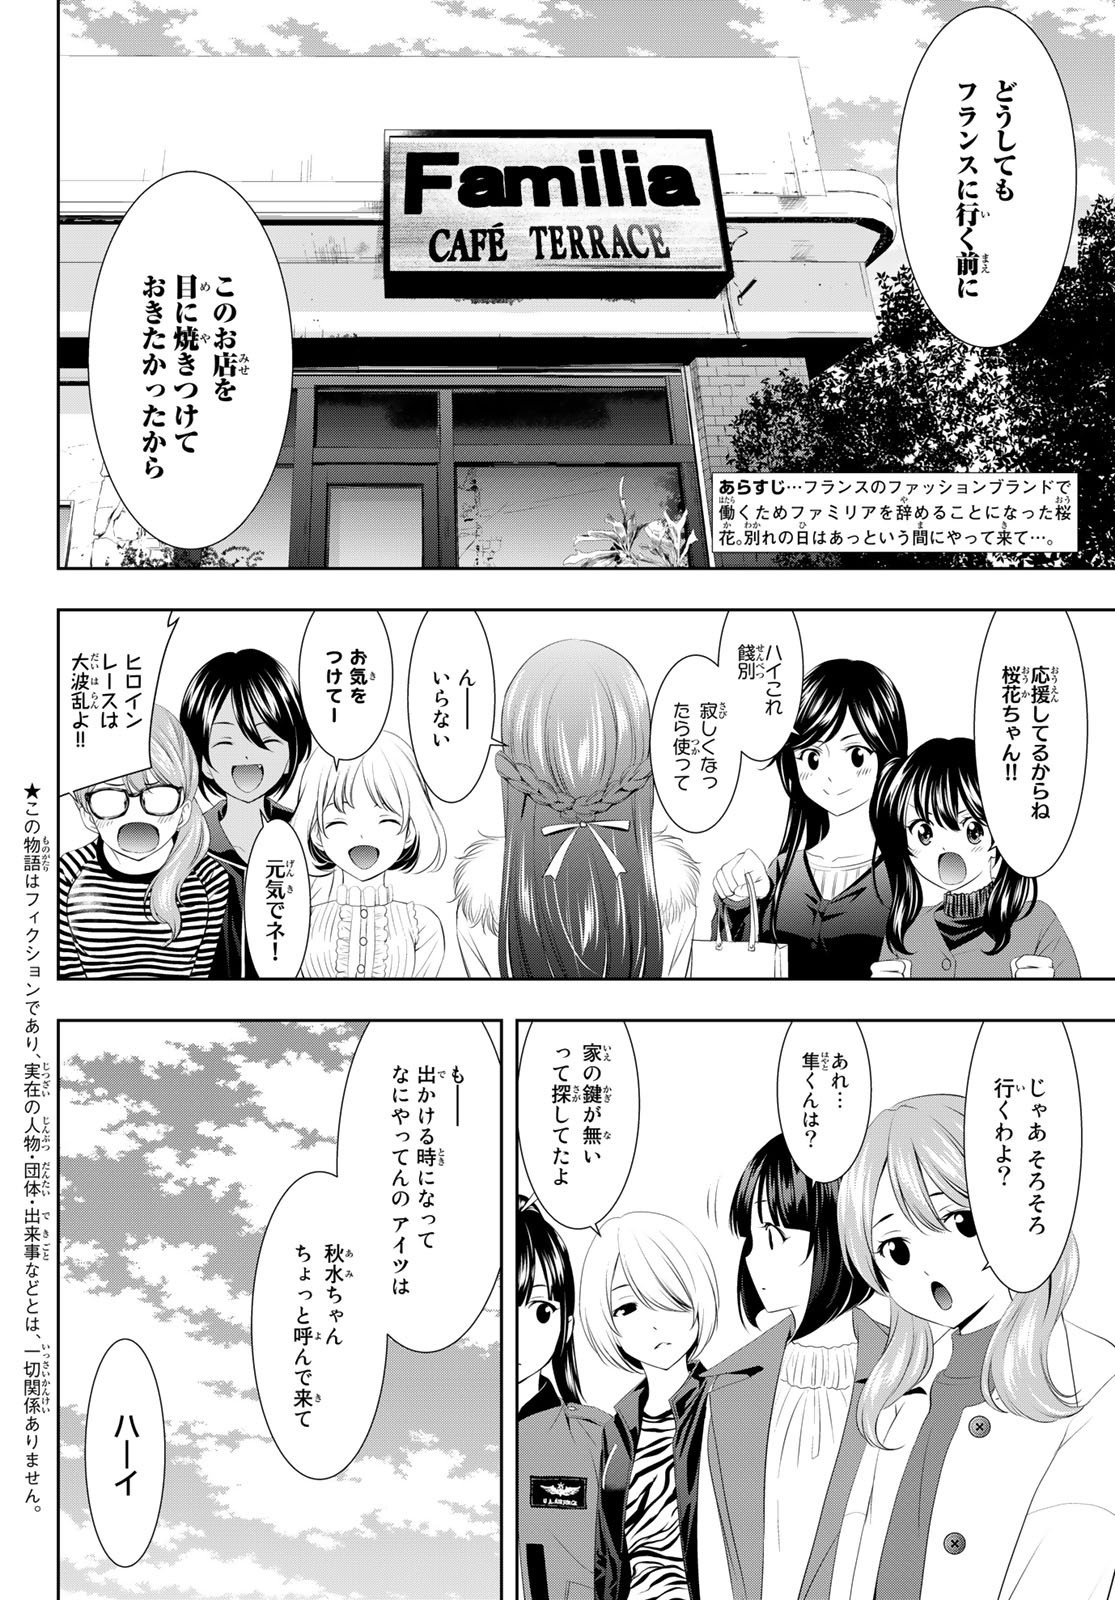 Goddess-Cafe-Terrace - Chapter 089 - Page 2